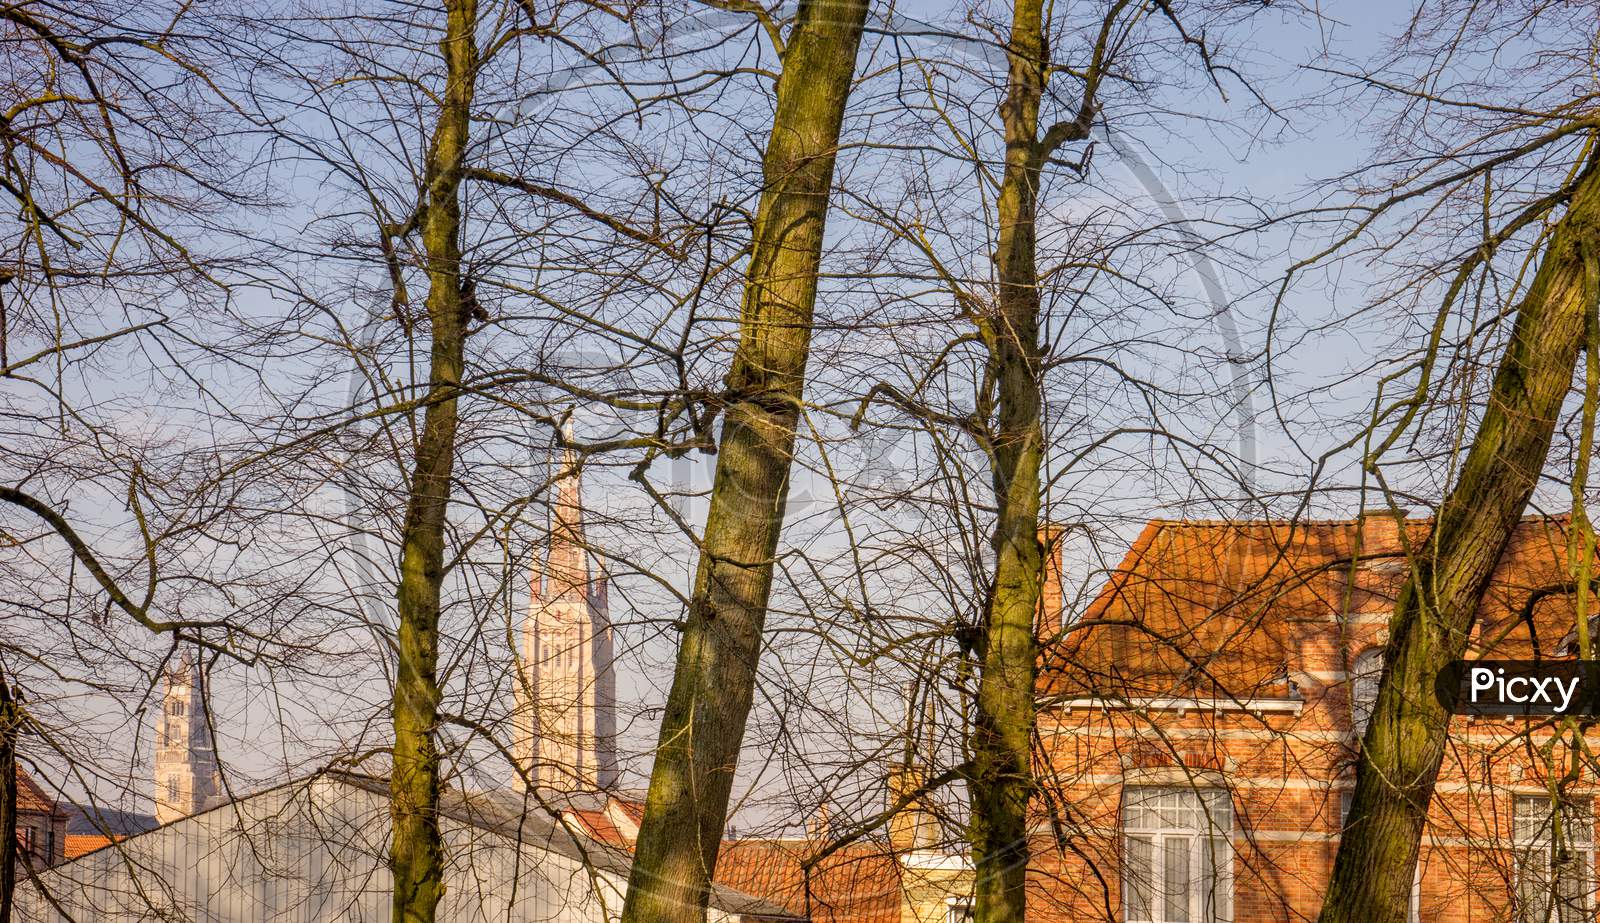 Belgium, Bruges, Barren  Trees Without Leaves